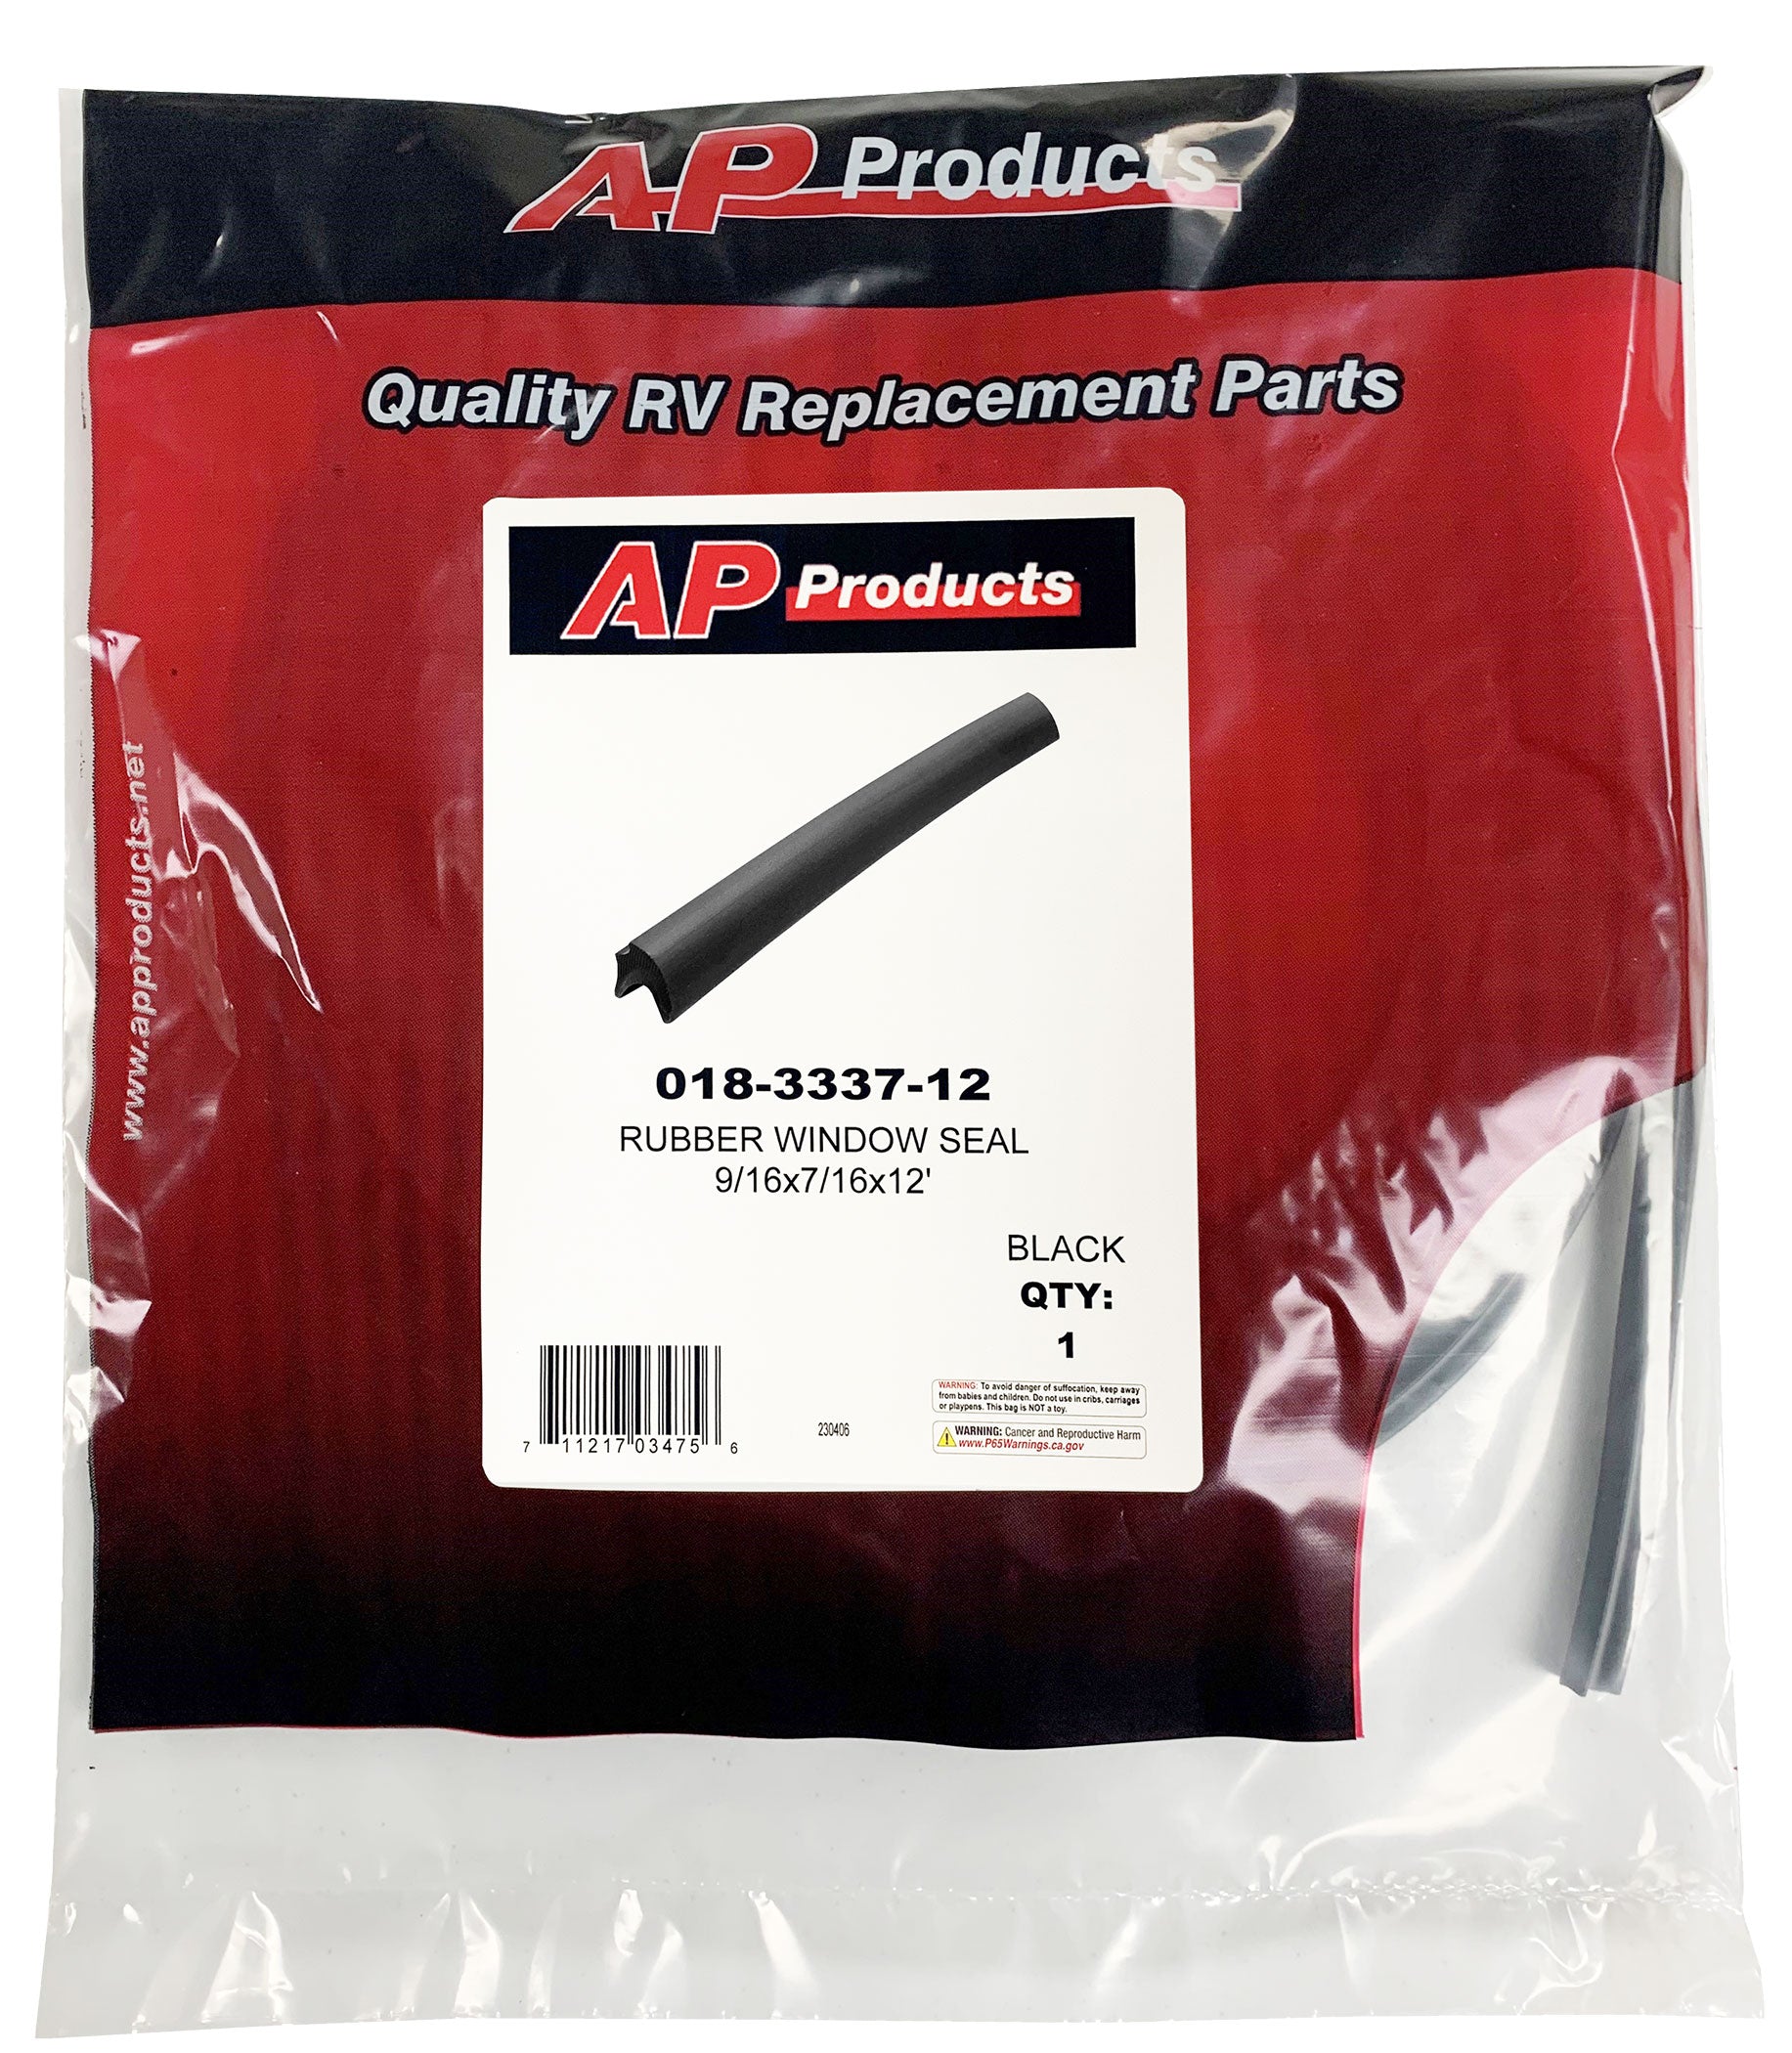 AP Products 018-3337-12 Rubber Window Seal - 9/16" x 7/16" x 12'